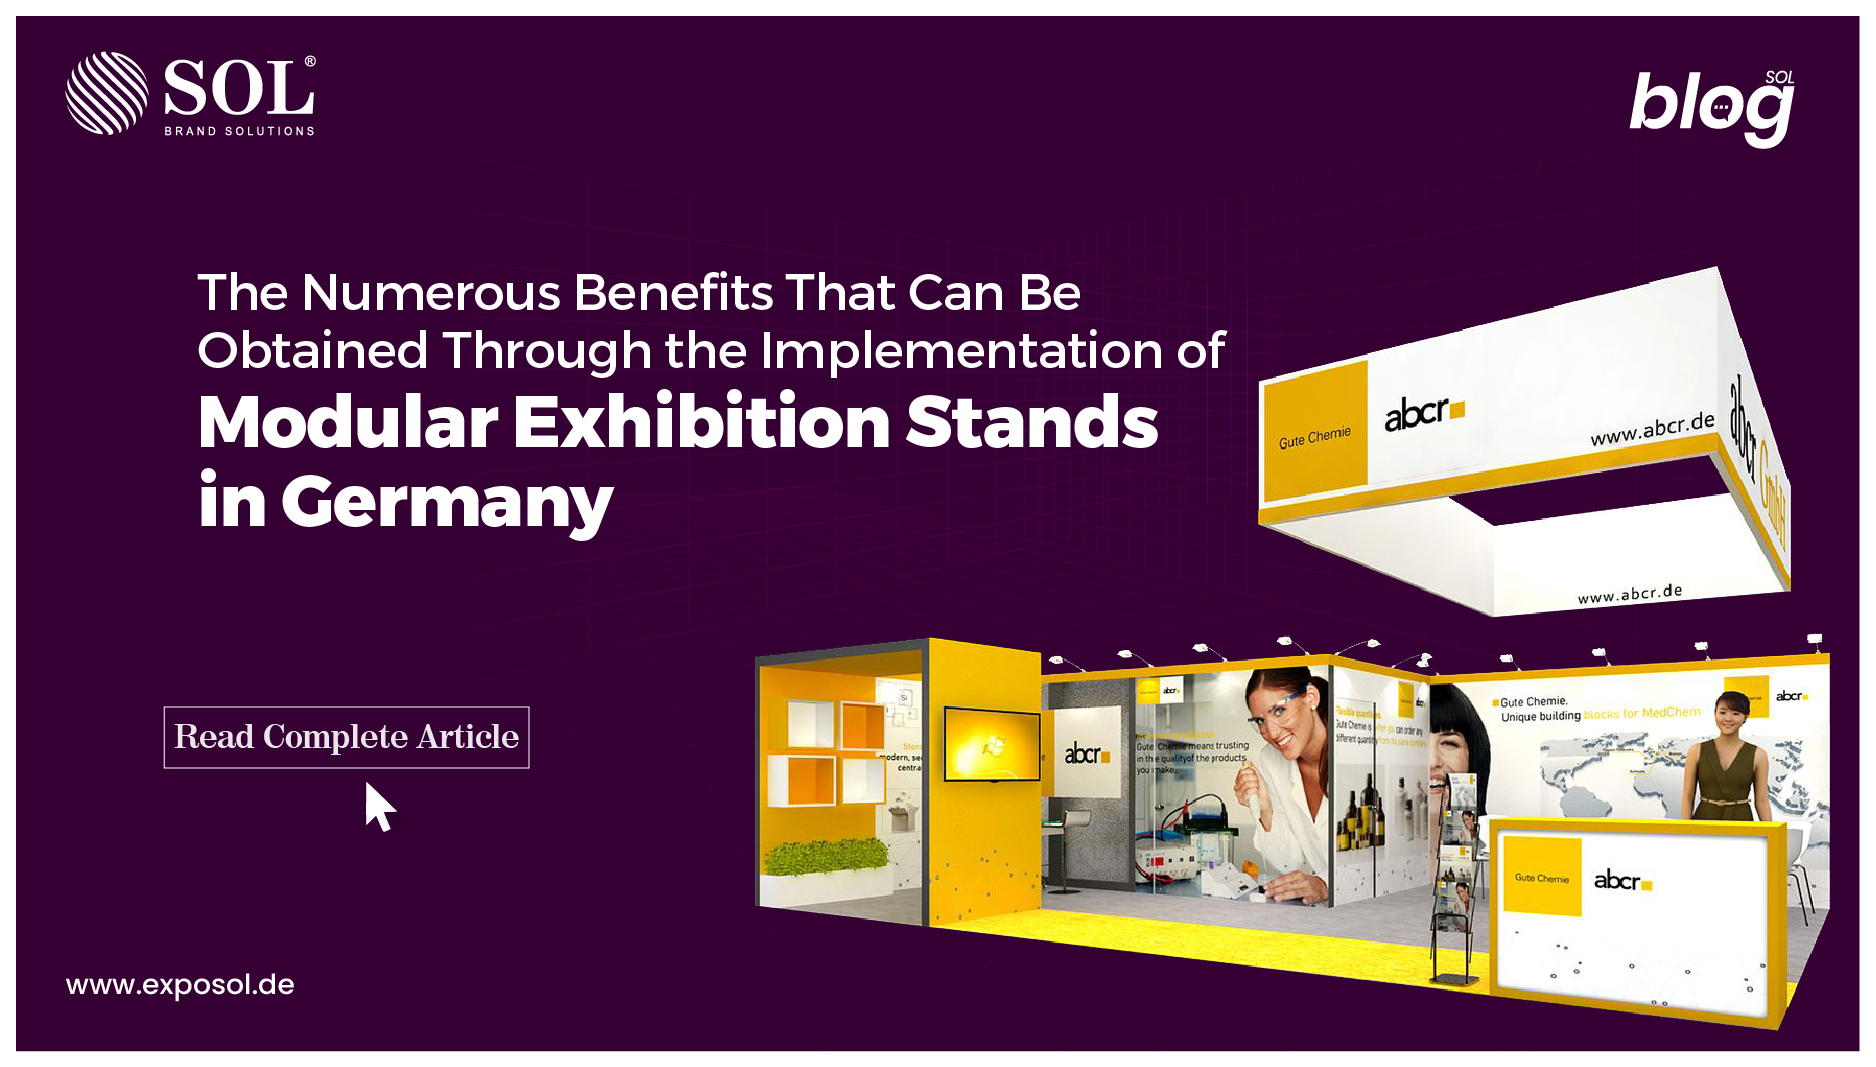 Modular Exhibition Stands in Germany : Transforming Exhibitions with Versatile Stands